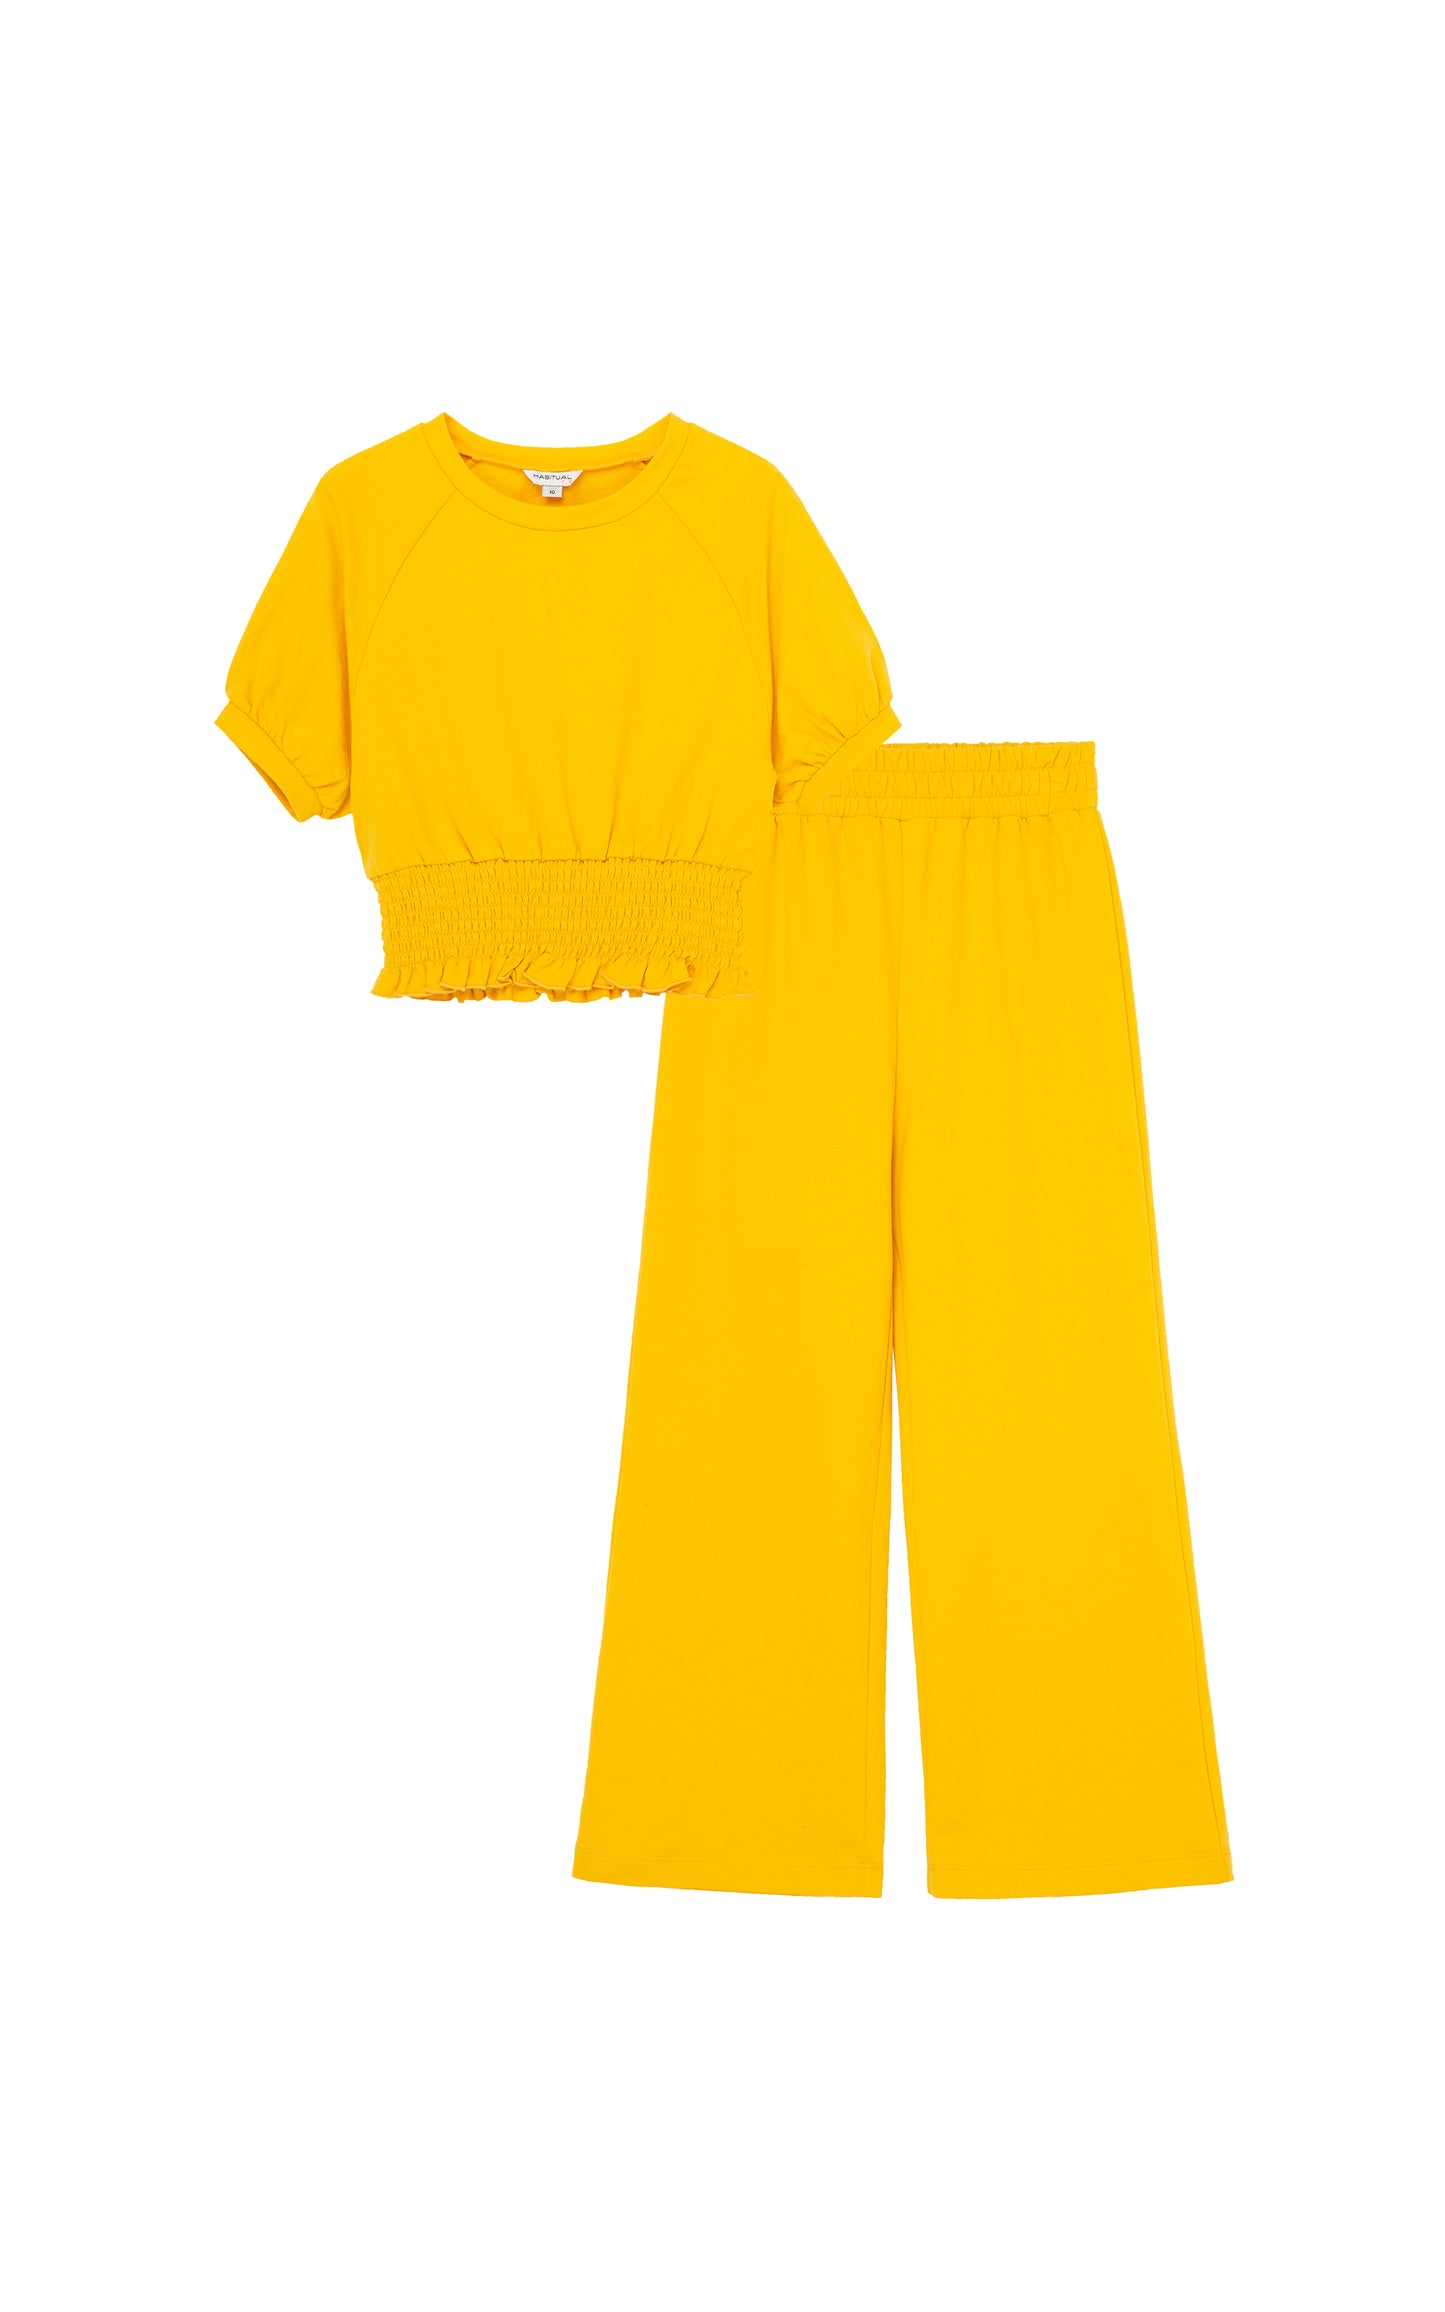 BRIGHT YELLOW SHORT-SLEEVE SWEATSHIRT WITH RUCHED WAIST AND MATCHING SWEATPANTS WITH RUCHED WAISTBAND AND FLARED BOTTOMS